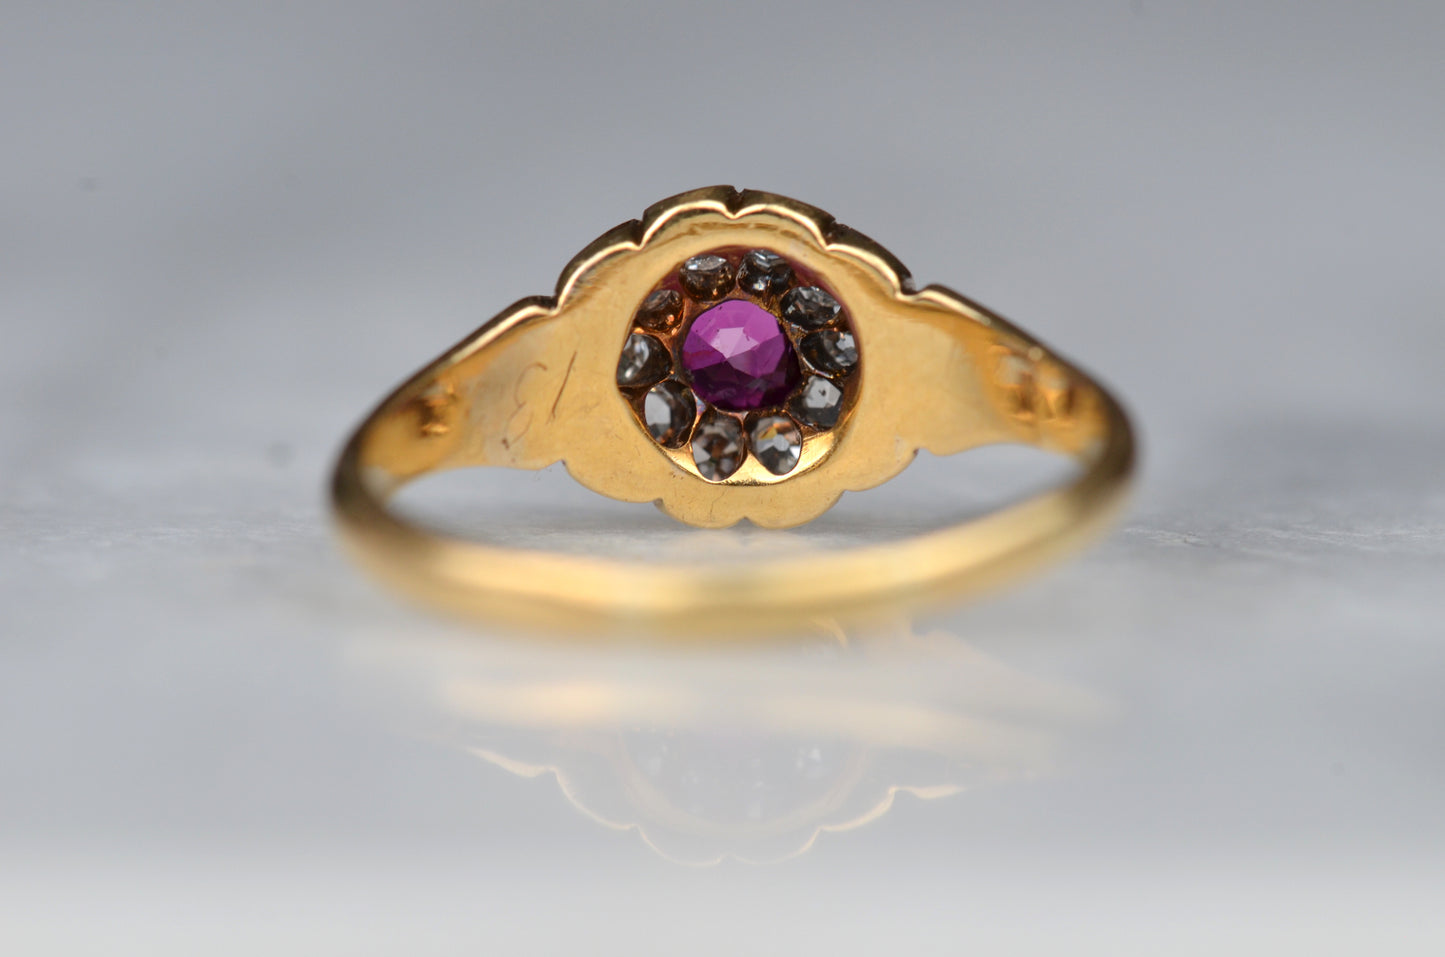 Romantic Antique Ruby Halo Ring